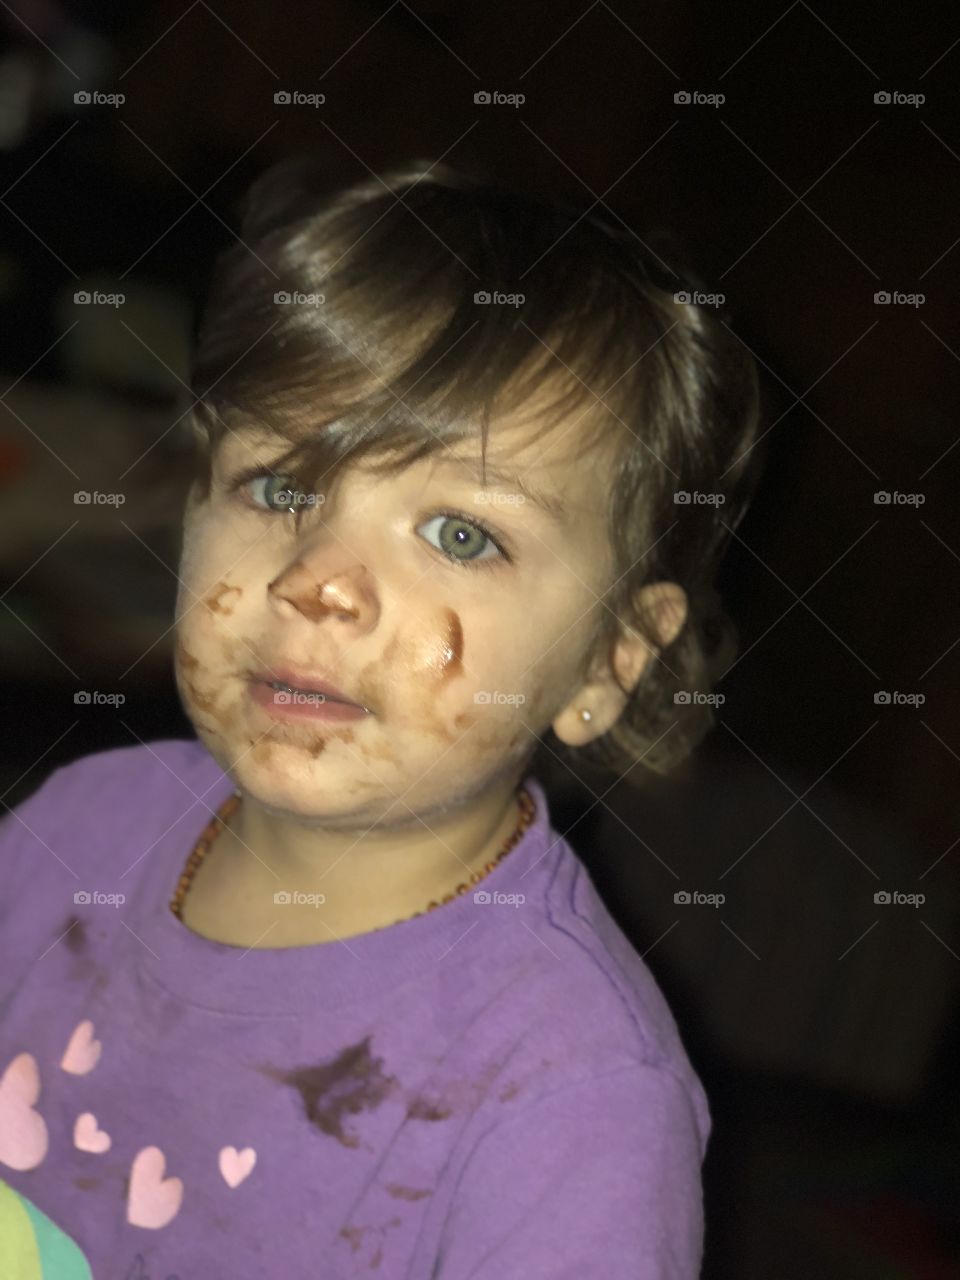 Toddler pudding face 